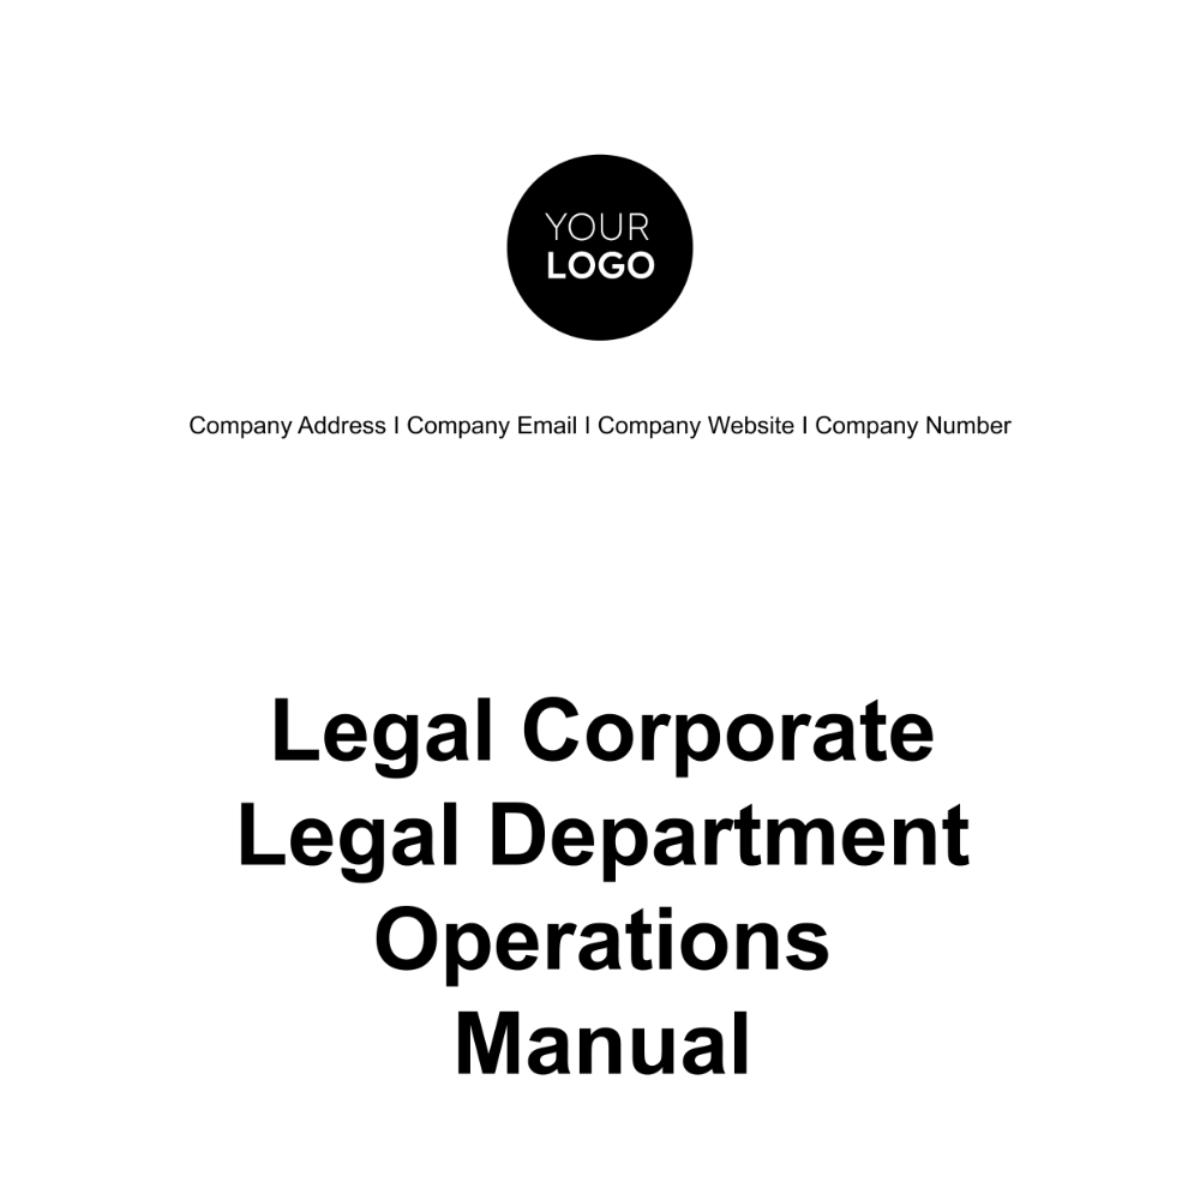 Free Legal Corporate Legal Department Operations Manual Template